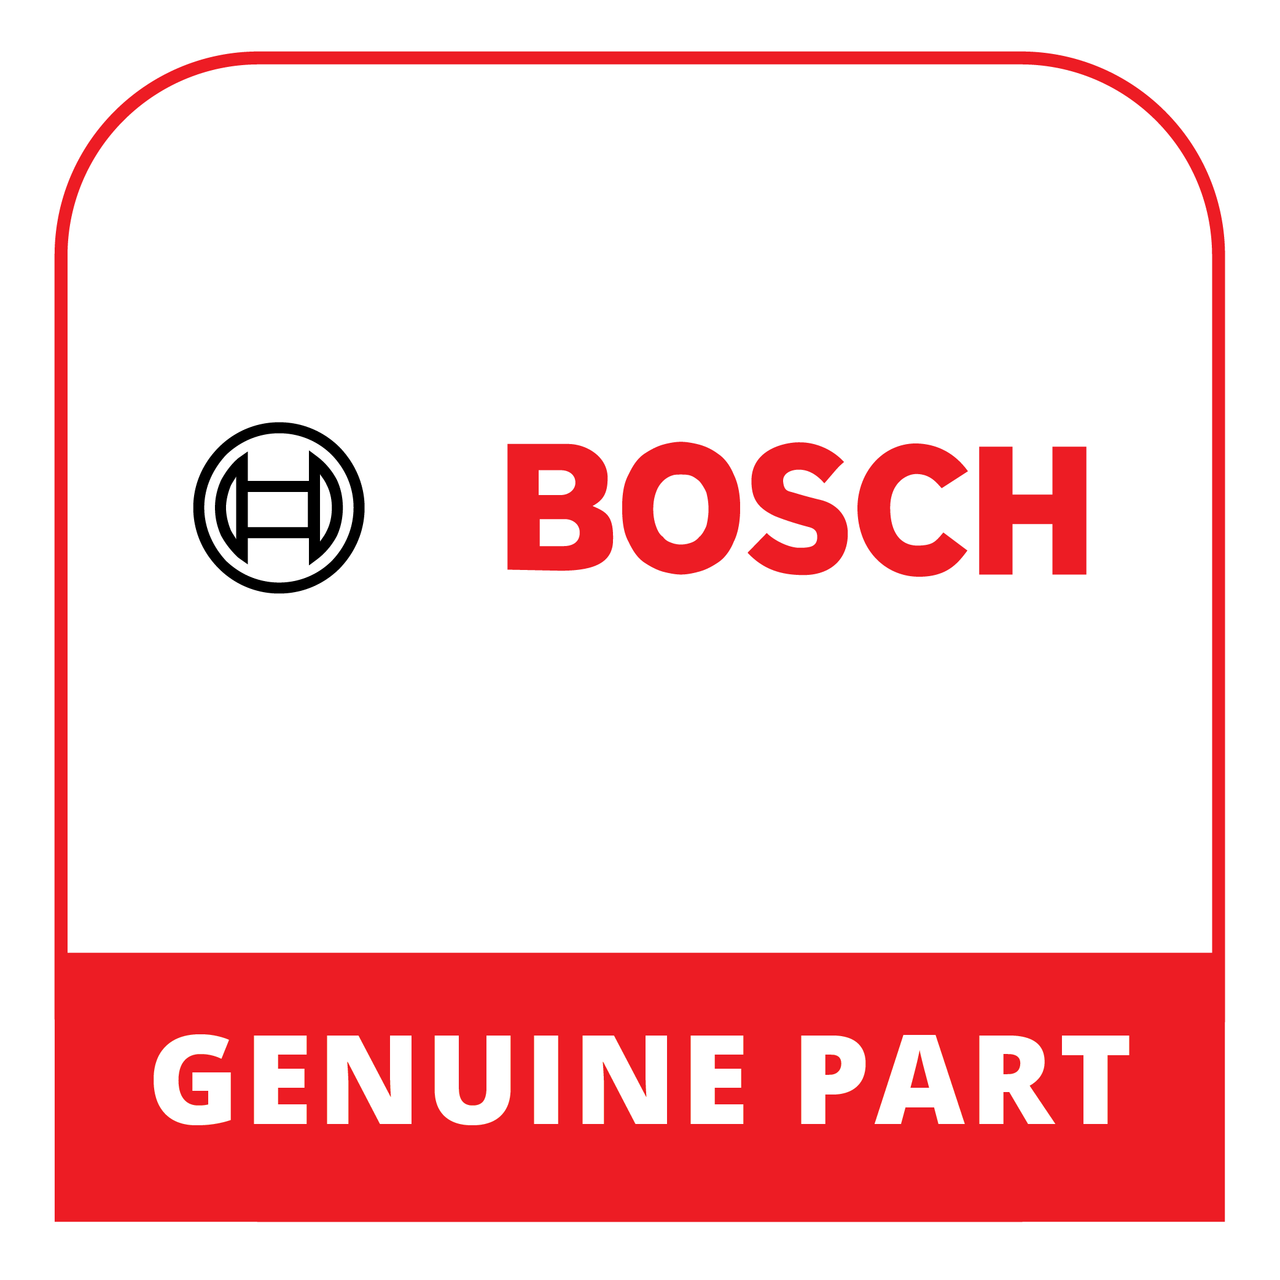 Bosch (Thermador) 10009244 - Holder - Genuine Bosch (Thermador) Part